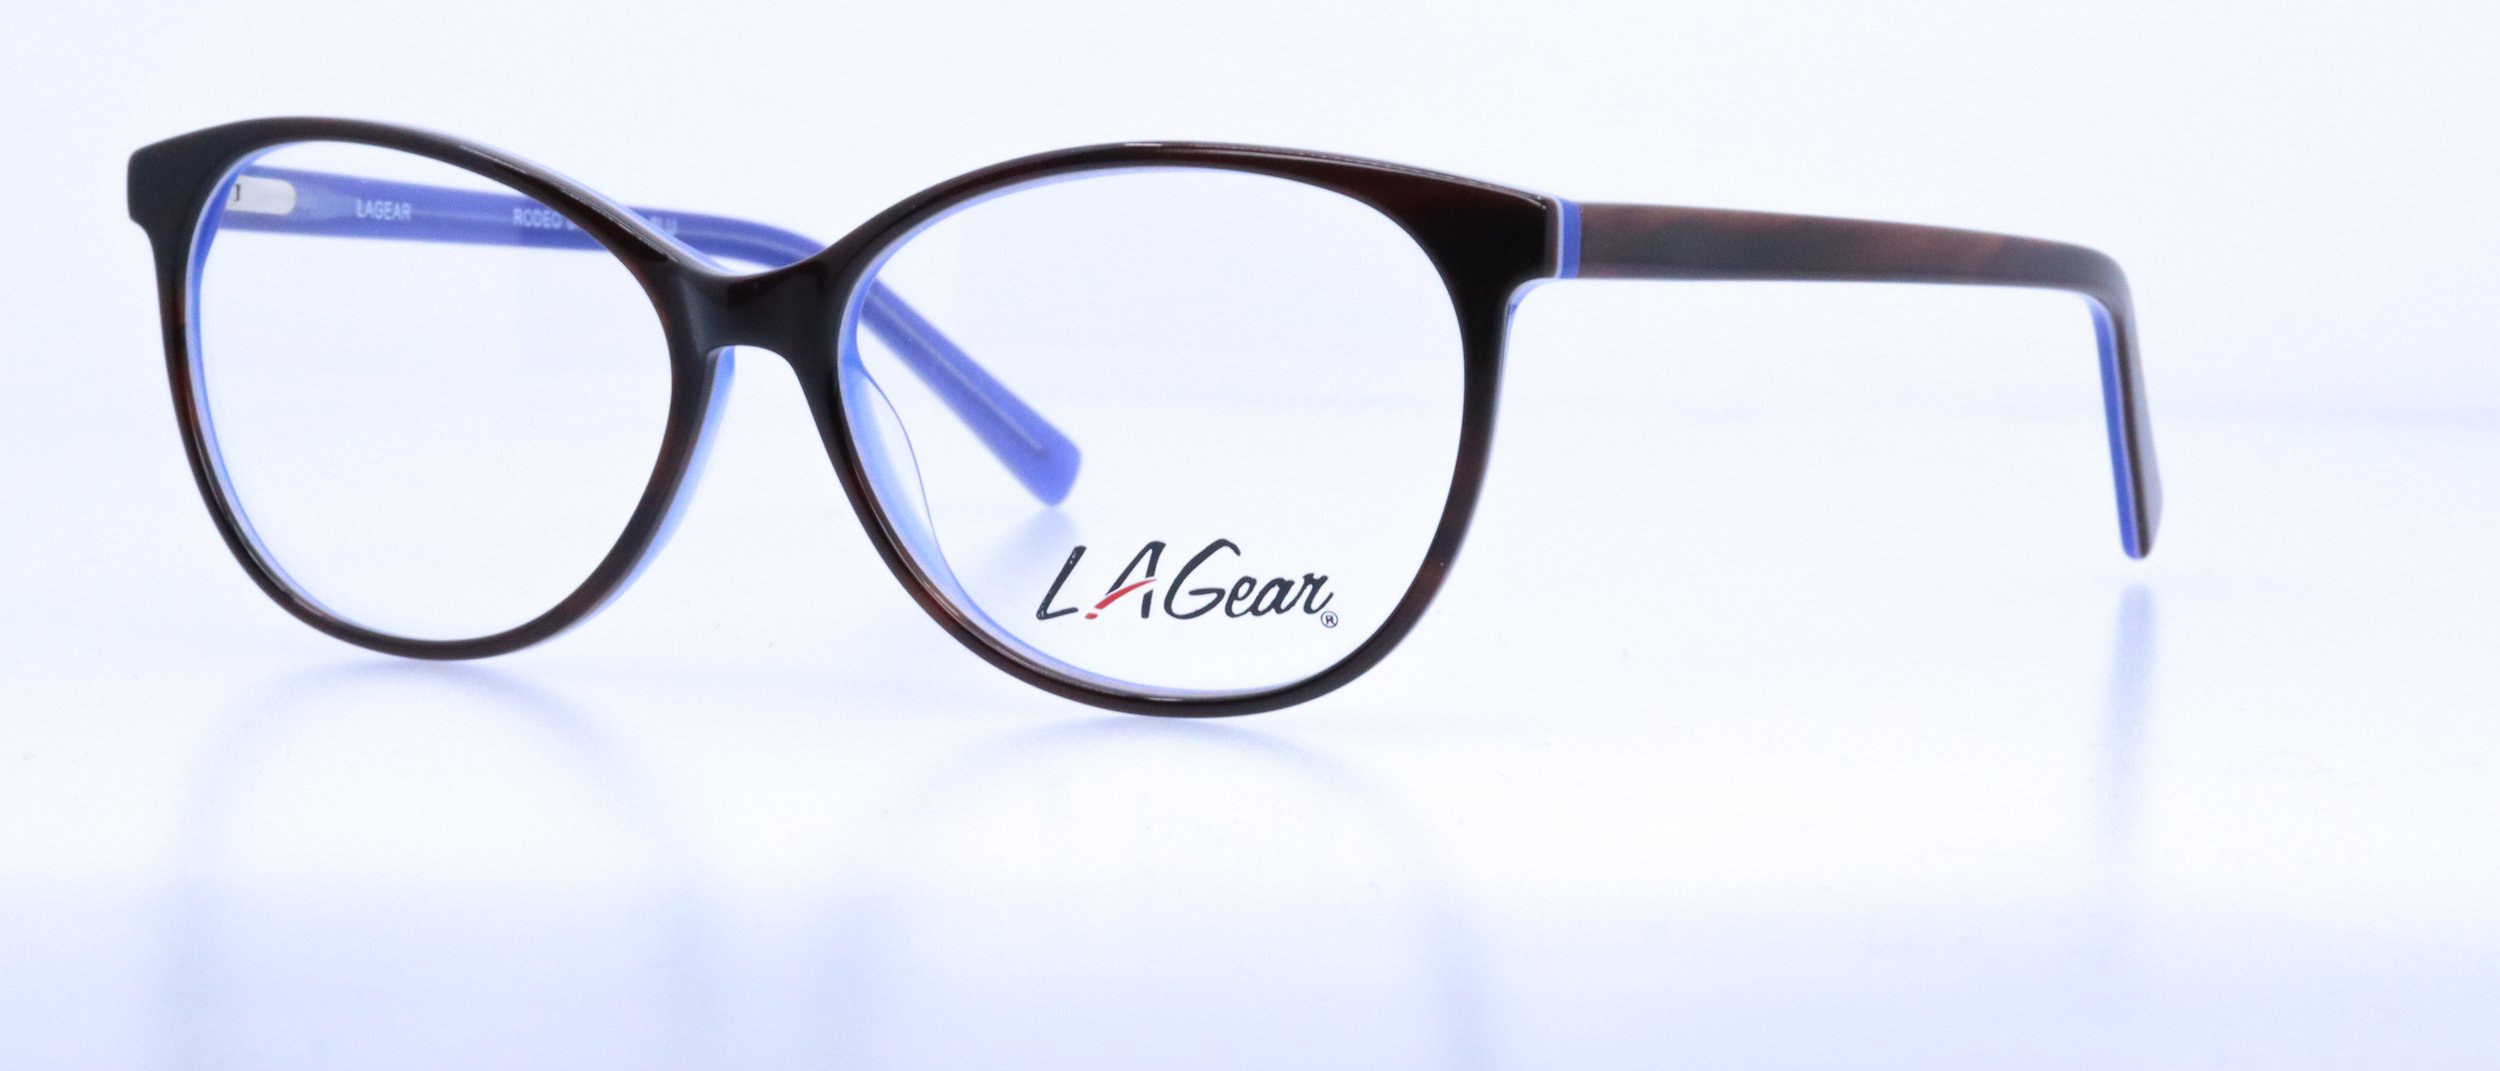  Rodeo Drive: 55-15-140, Available in Tortoise/Blue or Tortoise/Green 